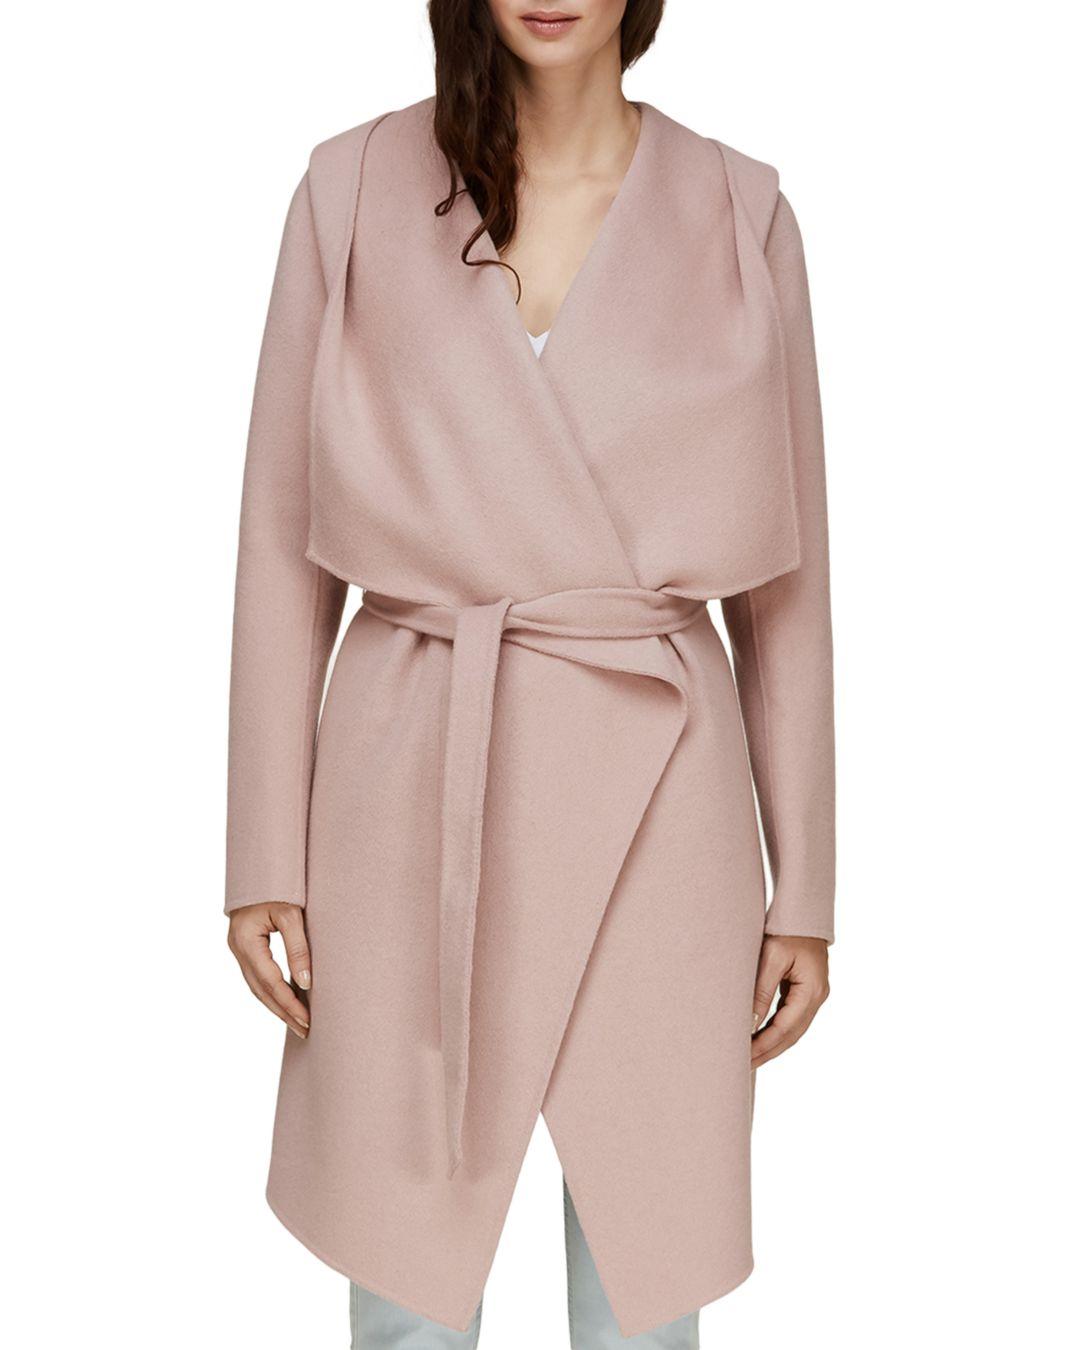 SOIA & KYO Exaggerated Shawl Collar Coat in Rose (Pink) - Lyst